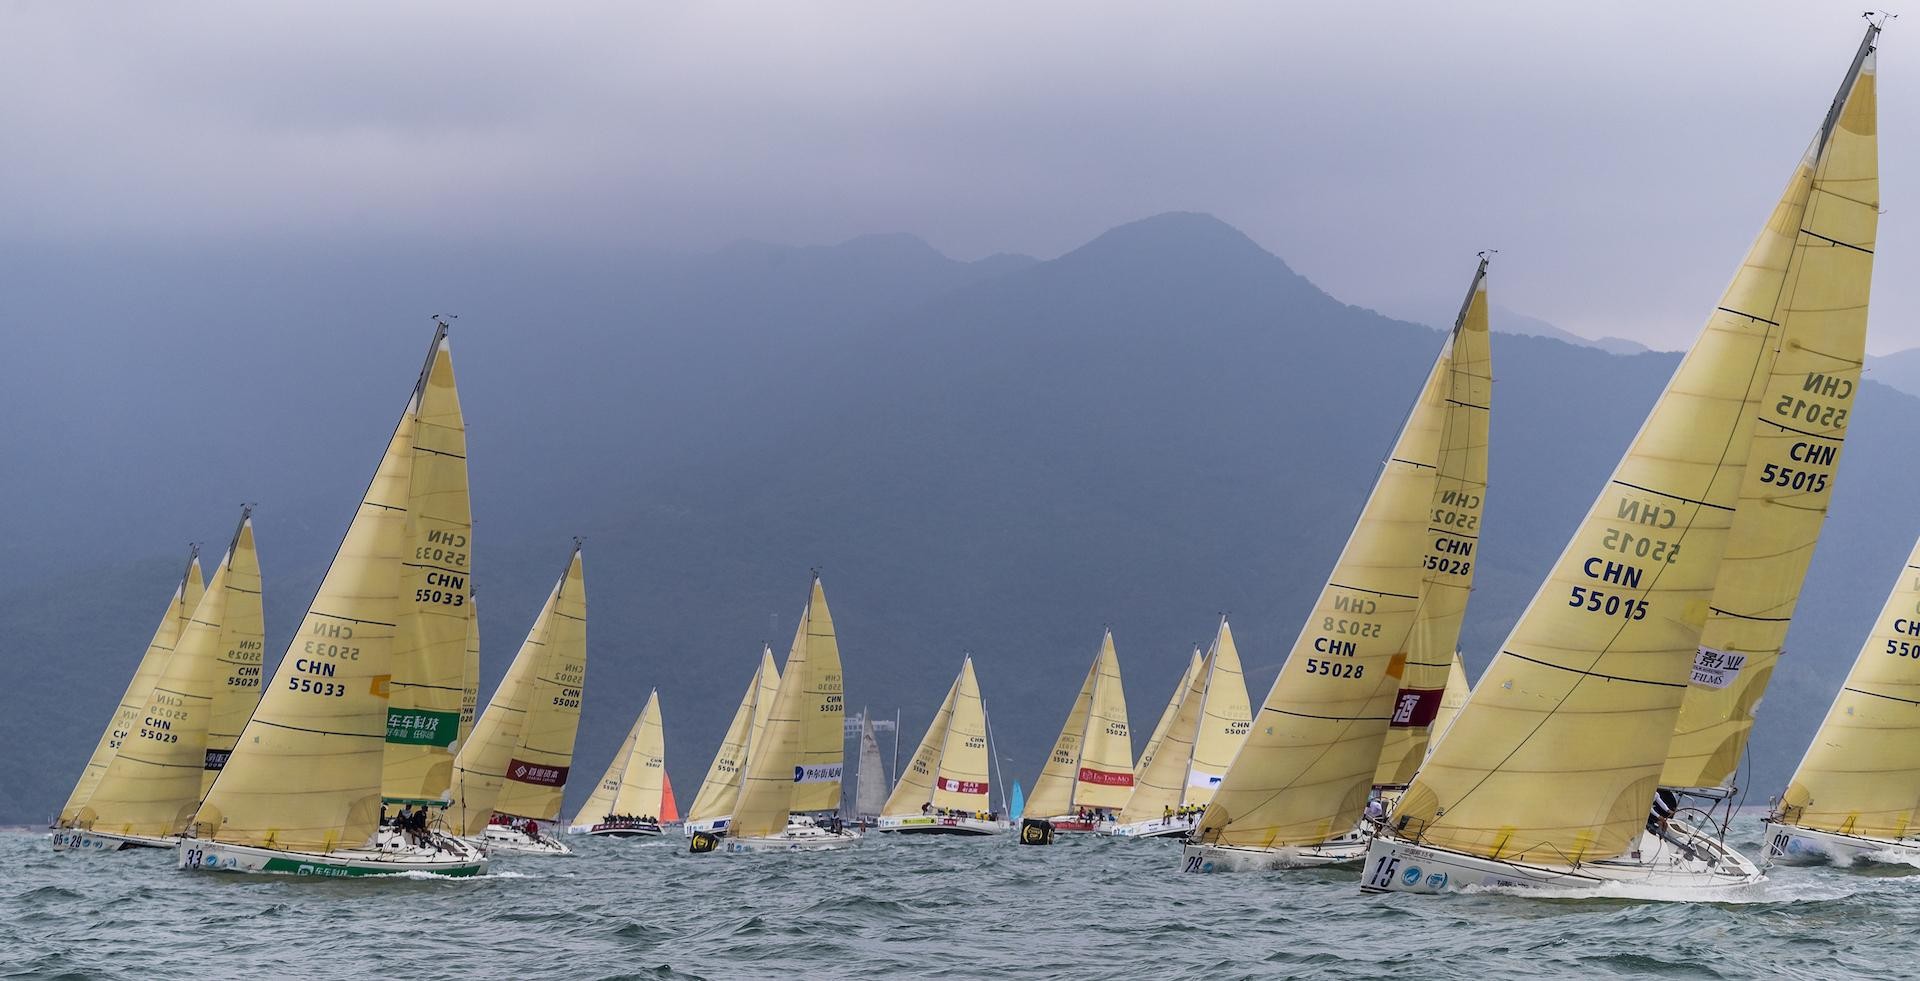  Kiwis back to regain title at 13th edition of China Cup